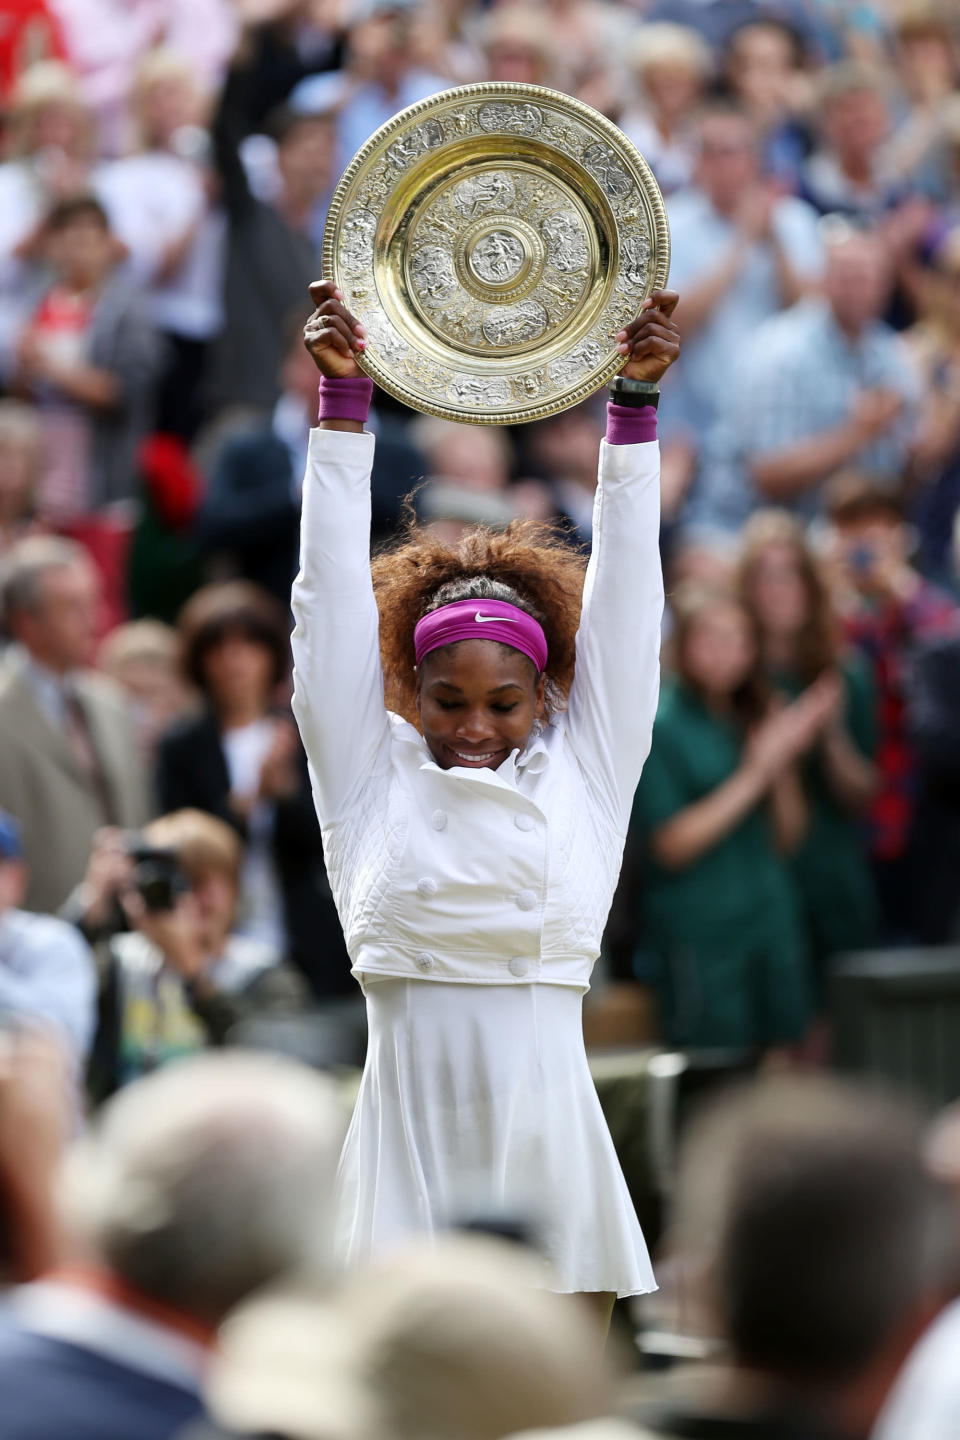 Serena Williams of the USA lifts the winners trophy and celebrates after her Ladies Singles final match against Agnieszka Radwanska of Poland on day twelve of the Wimbledon Lawn Tennis Championships at the All England Lawn Tennis and Croquet Club on July 7, 2012 in London, England. (Photo by Clive Rose/Getty Images)